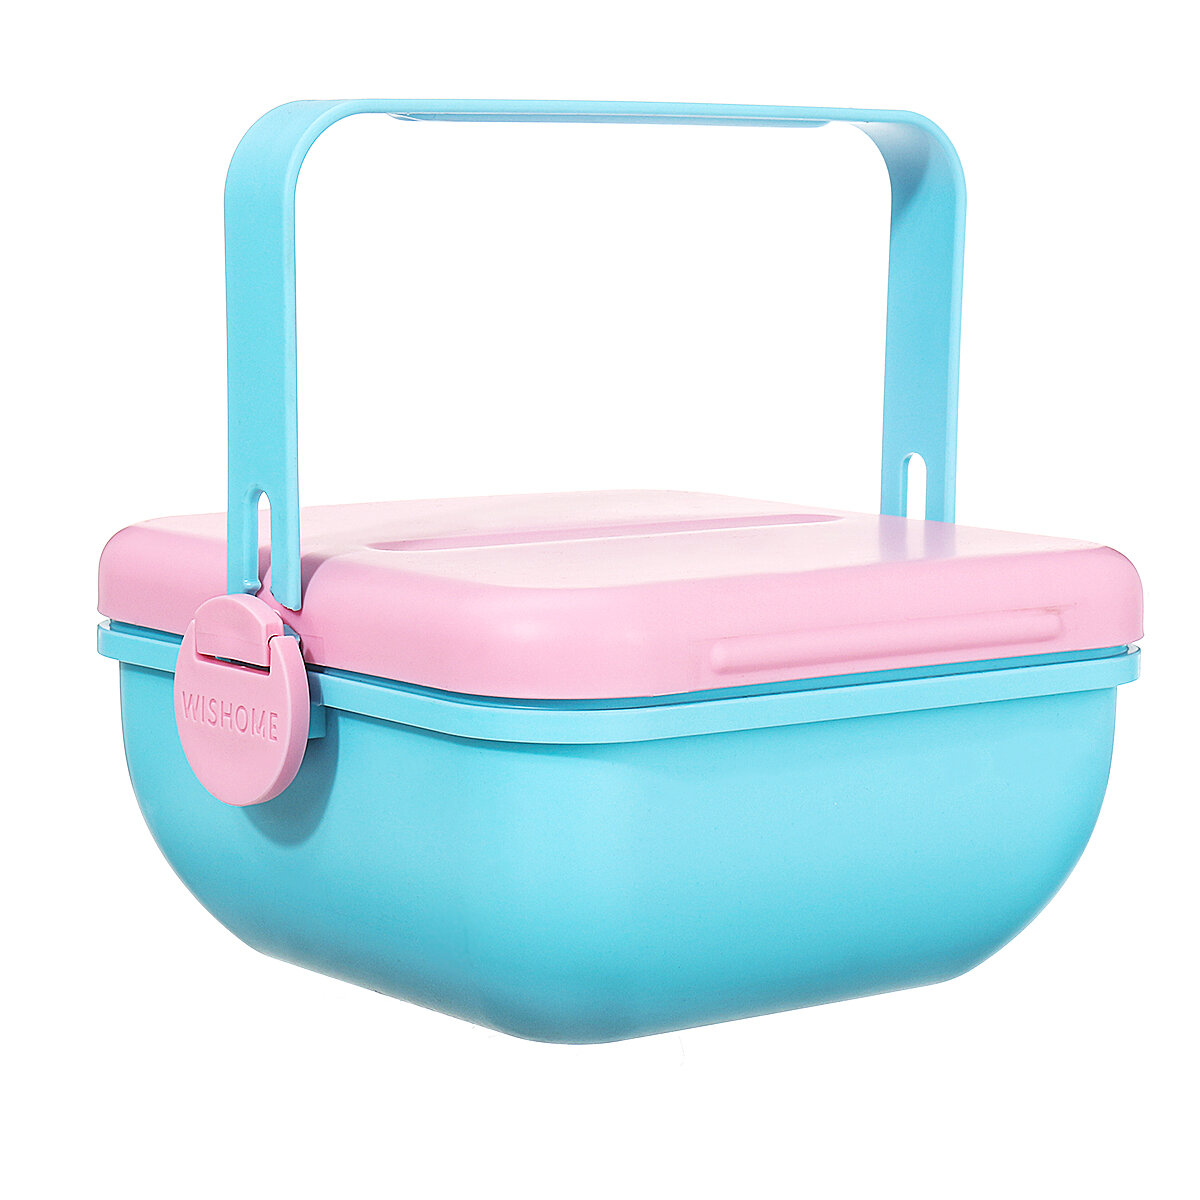 

Square Portable Salad Bowl Blue Pink Two Layers Lunch Box With Handle Food Fruit Relish Storage Box For Home Outdoor Pic